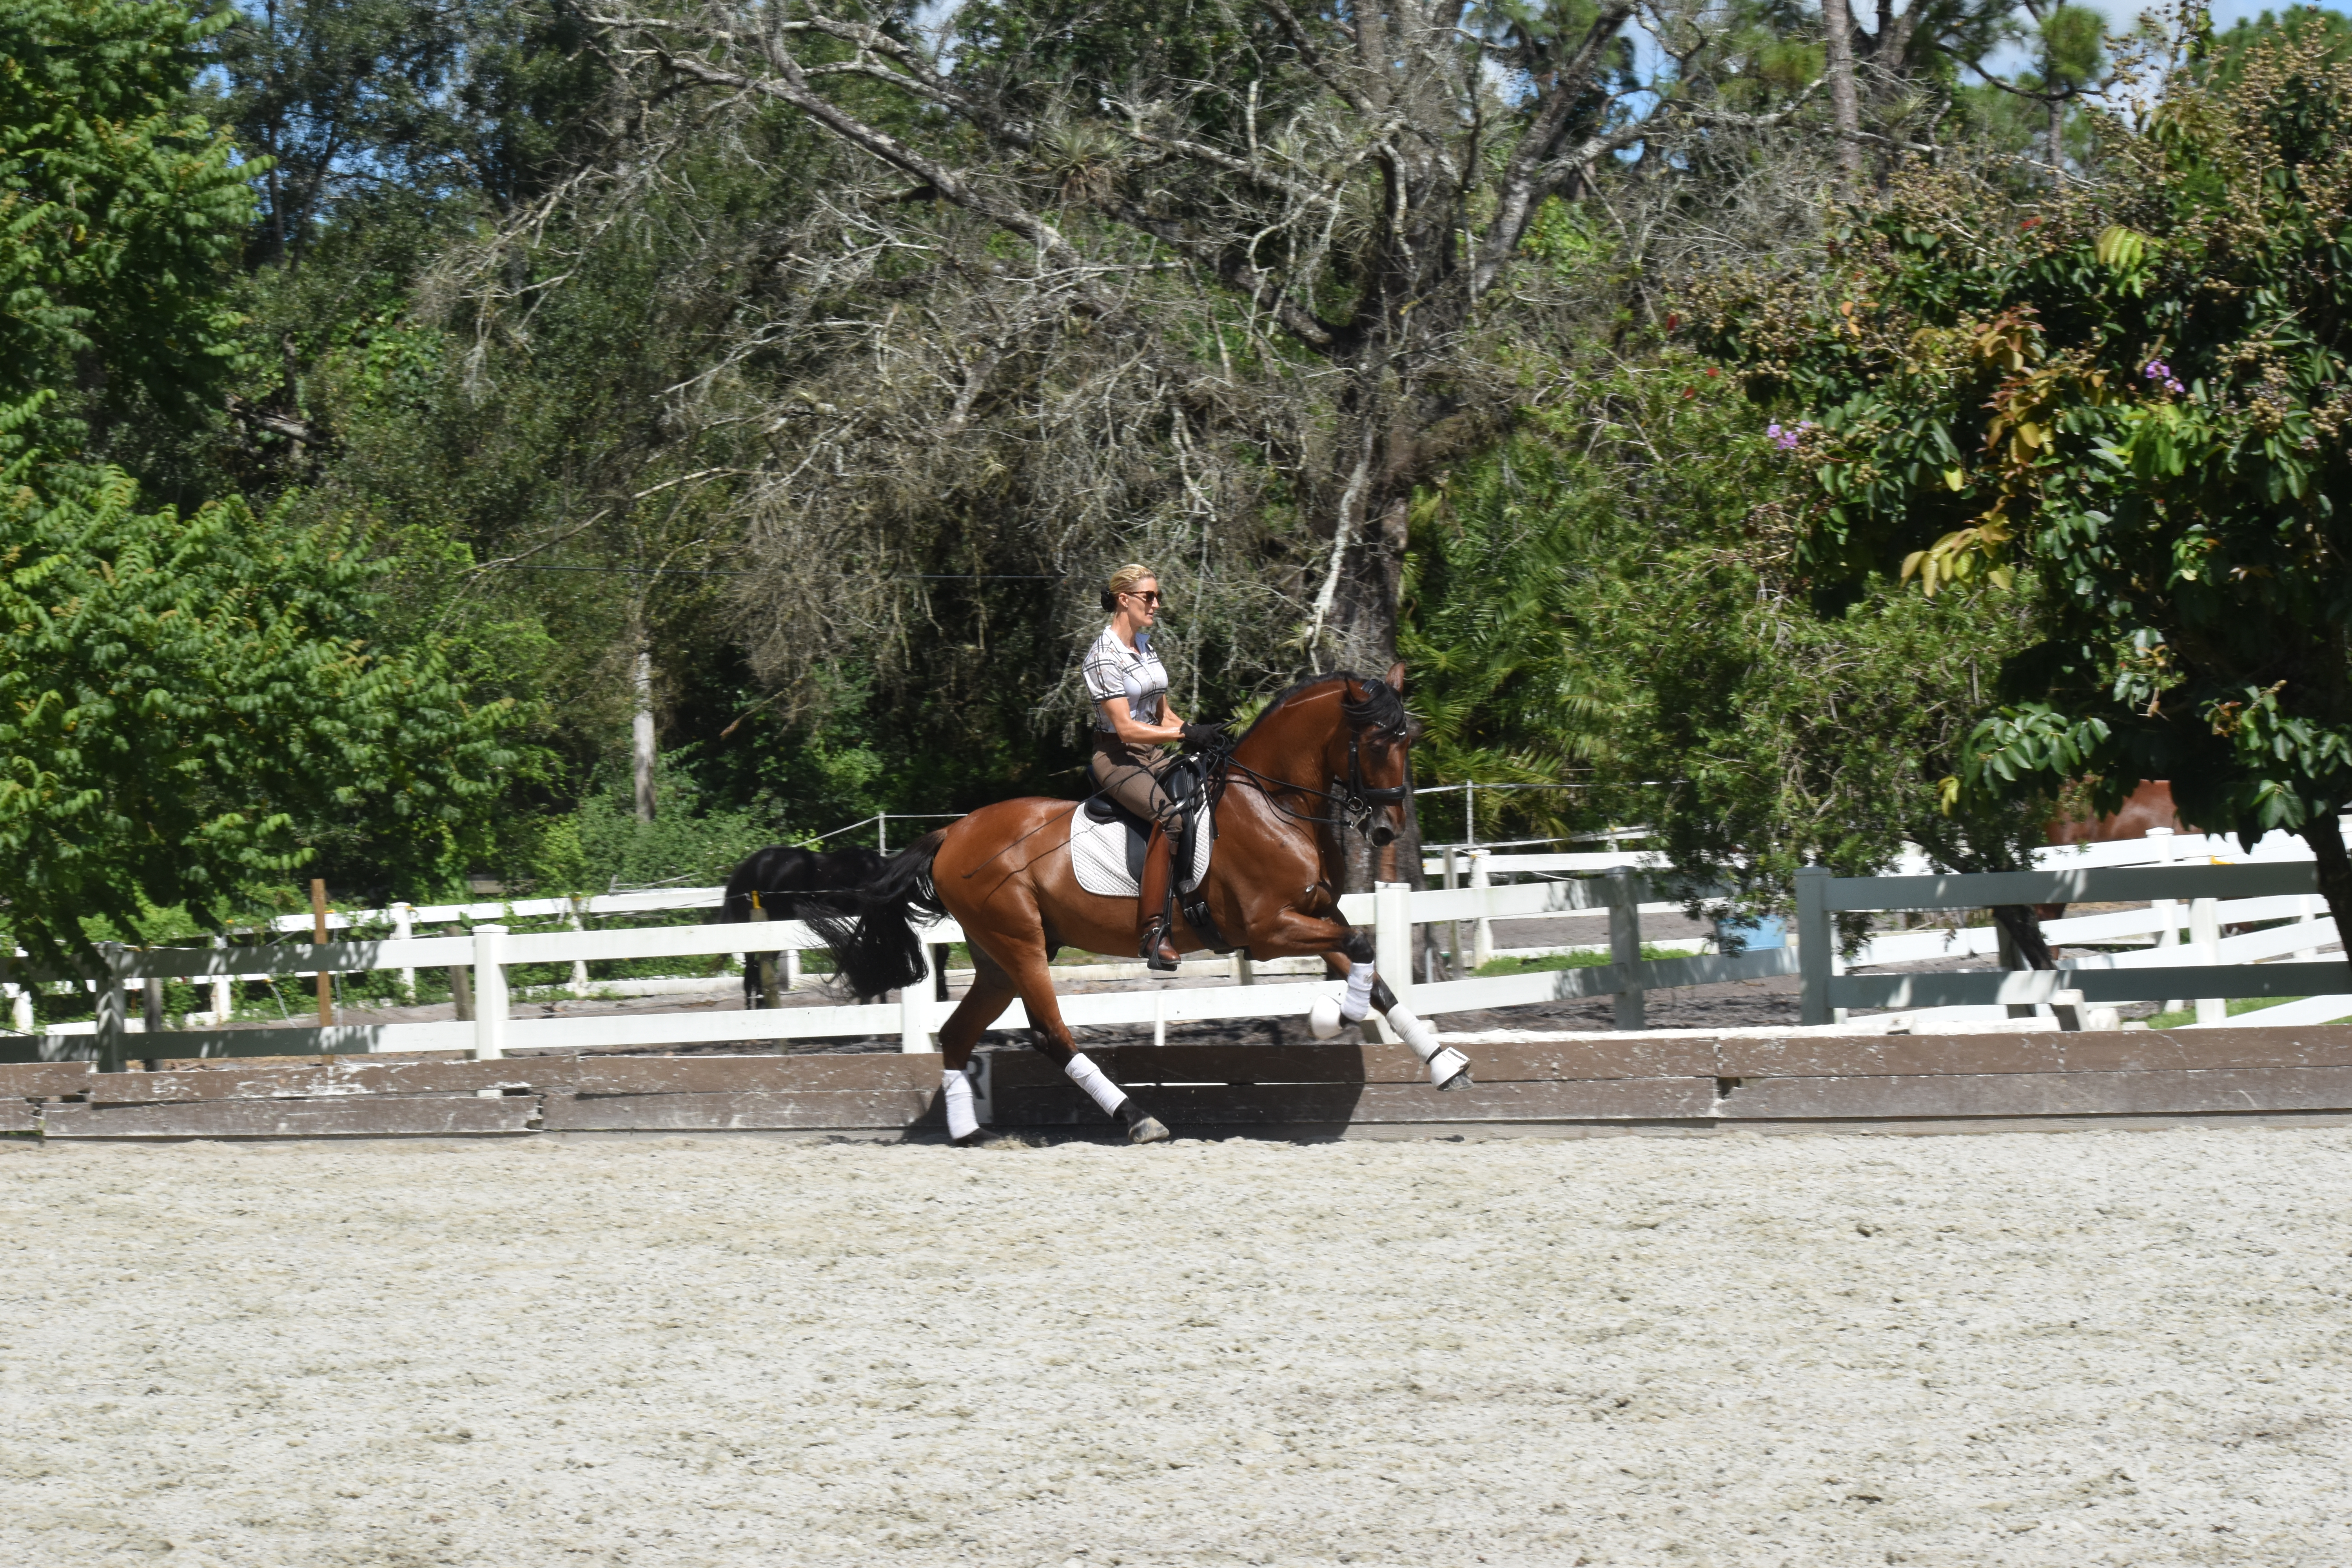 dressage horse for sale in Florida United States 